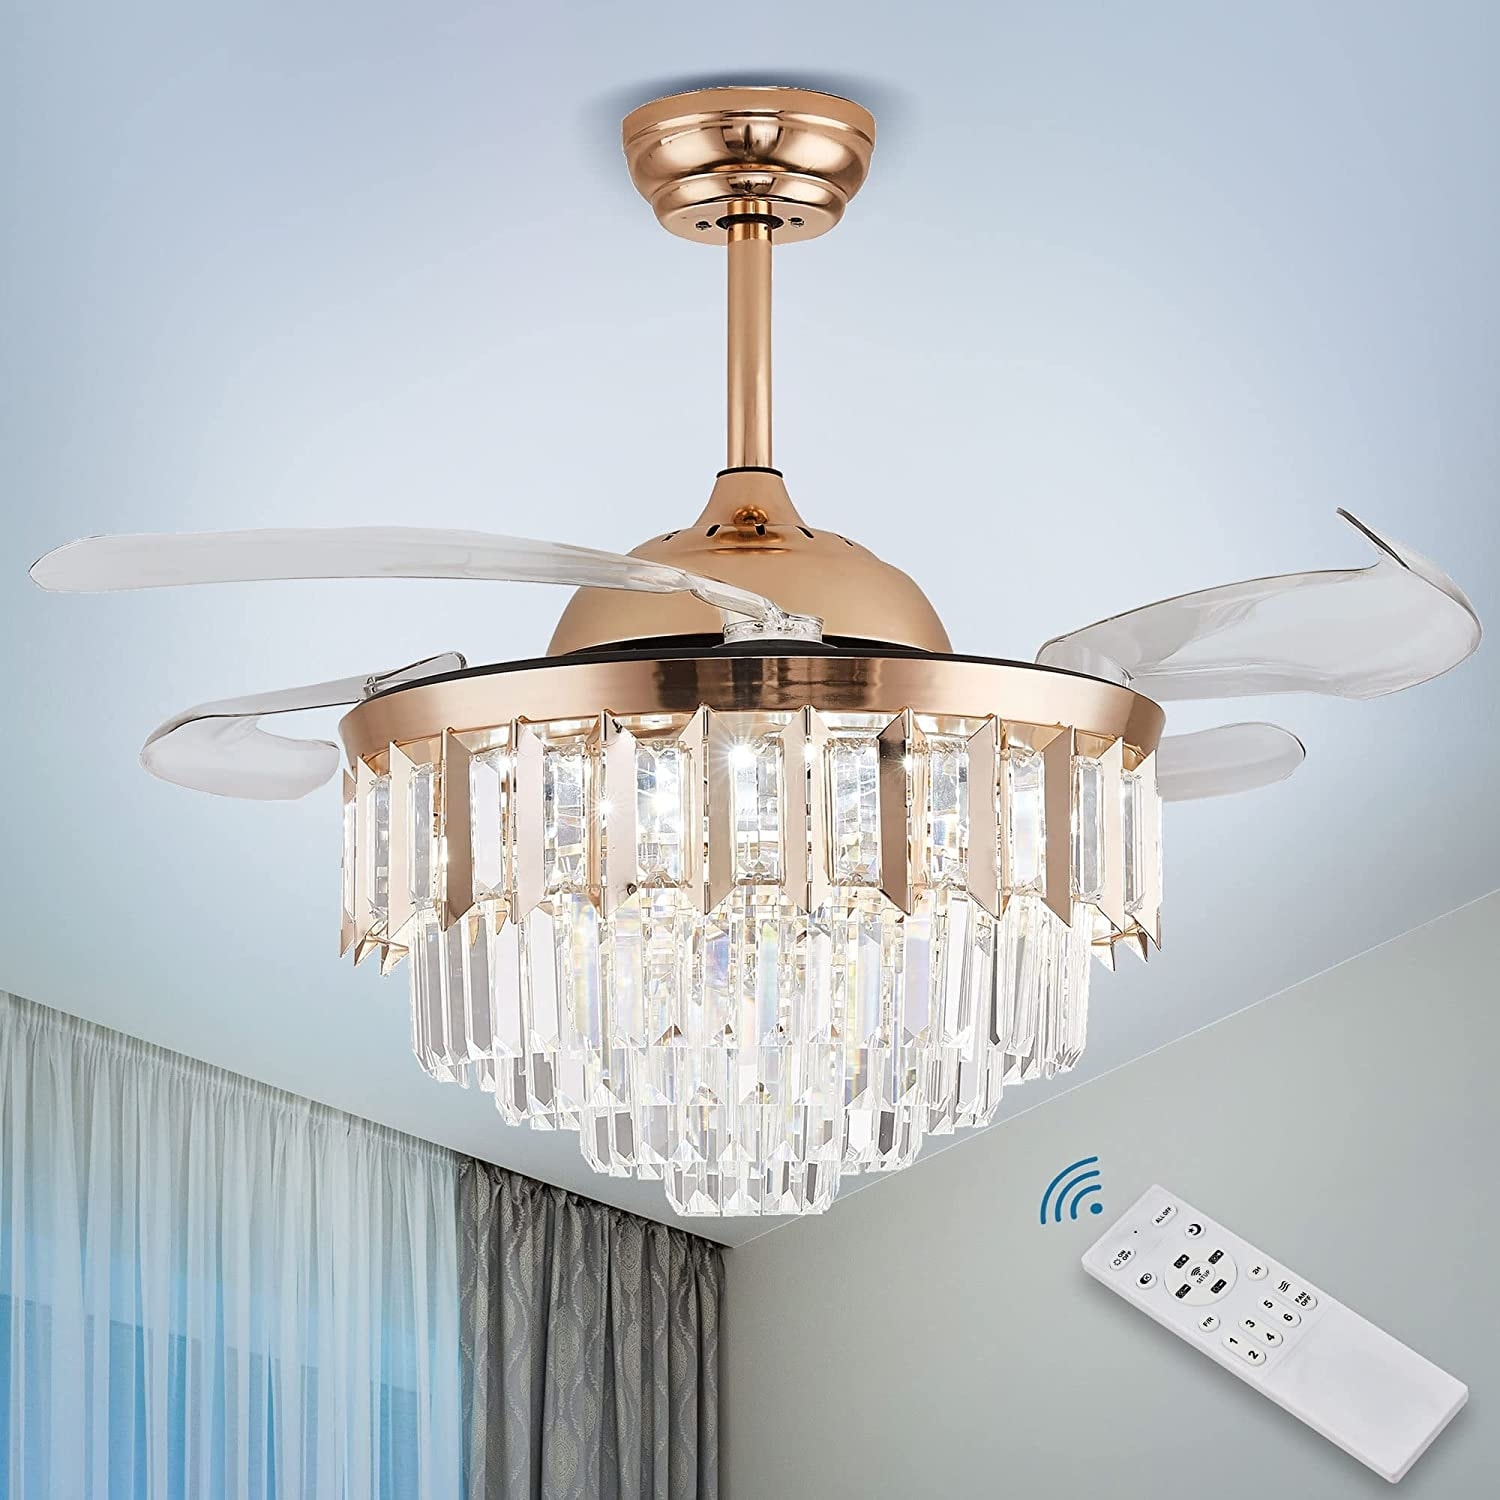 Crystal LED Ceiling Fans with Lights and Remote Controller 42 Inches Modern Fandelier Ceiling Lighting Fixture Crystal Fan